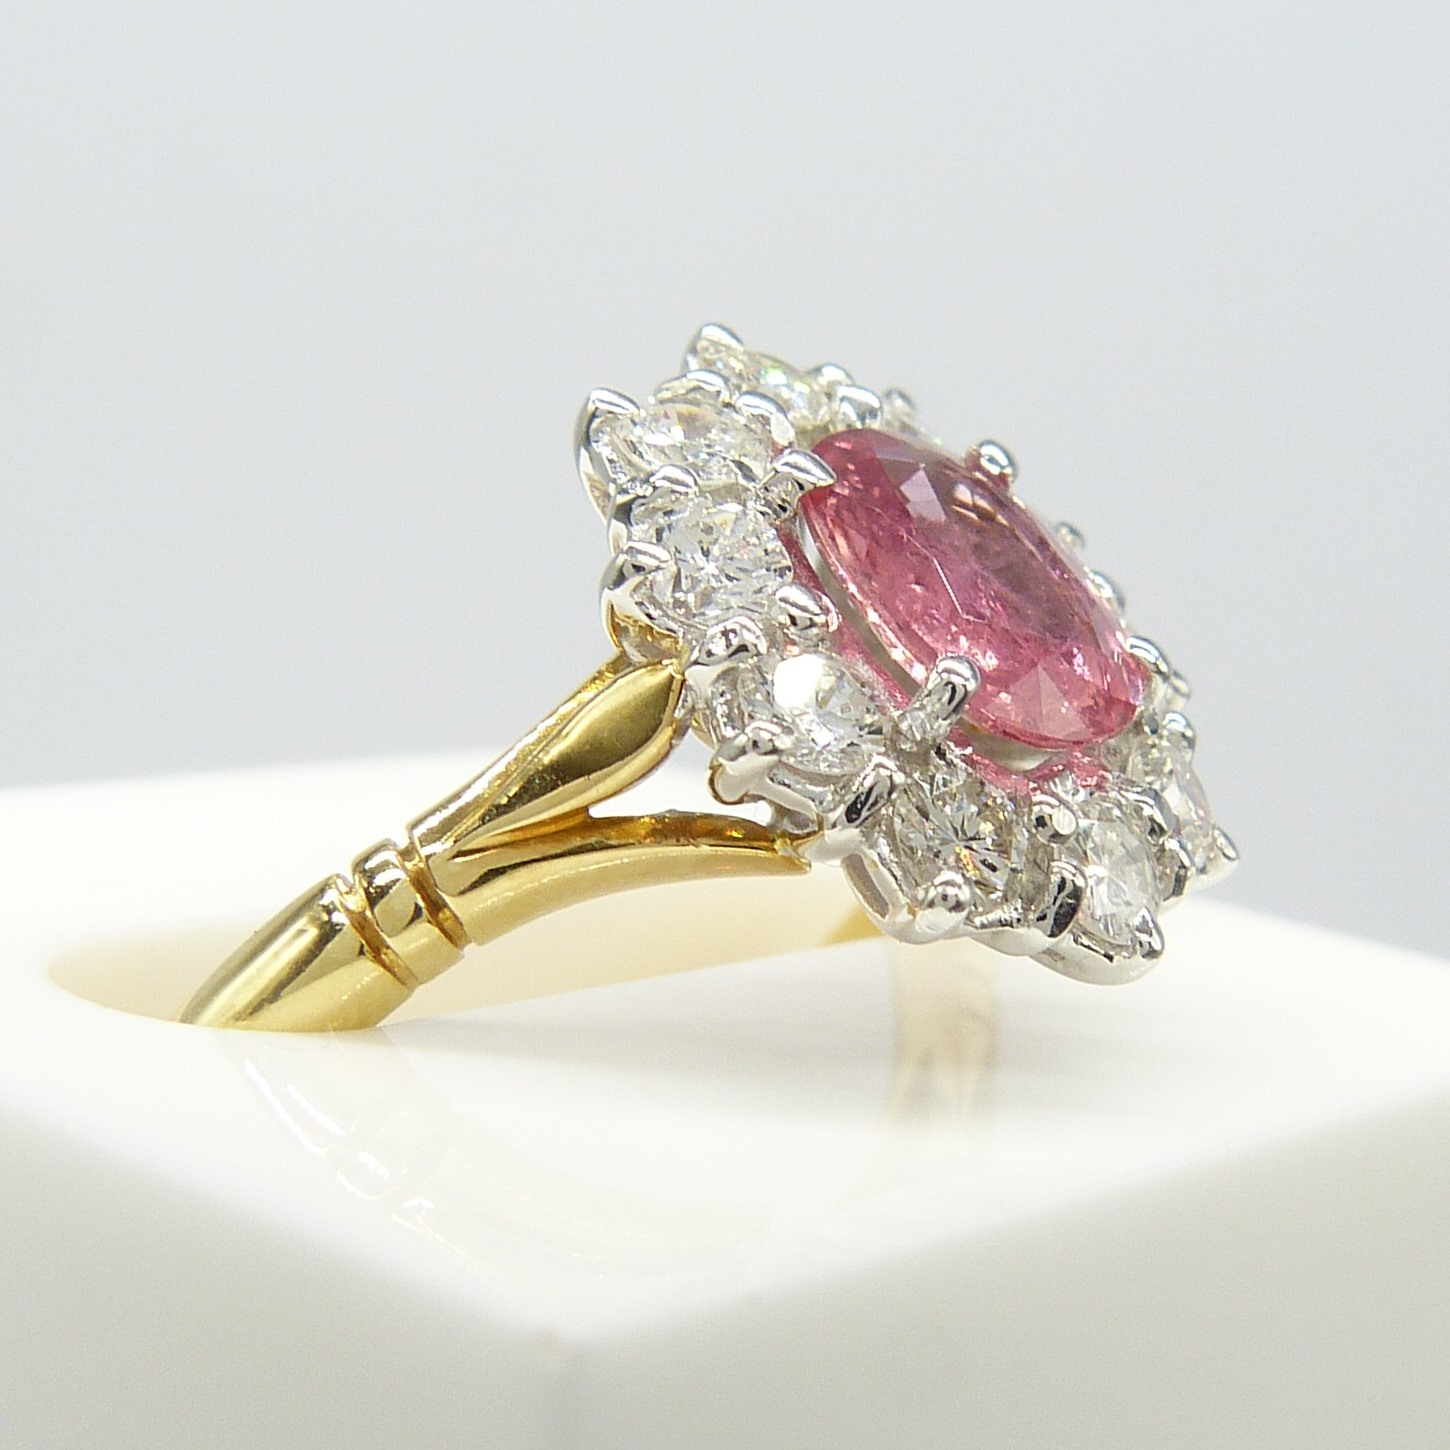 A pinkish-red natural Ruby and Diamond cluster ring in 18ct yellow and white Gold - Image 2 of 10